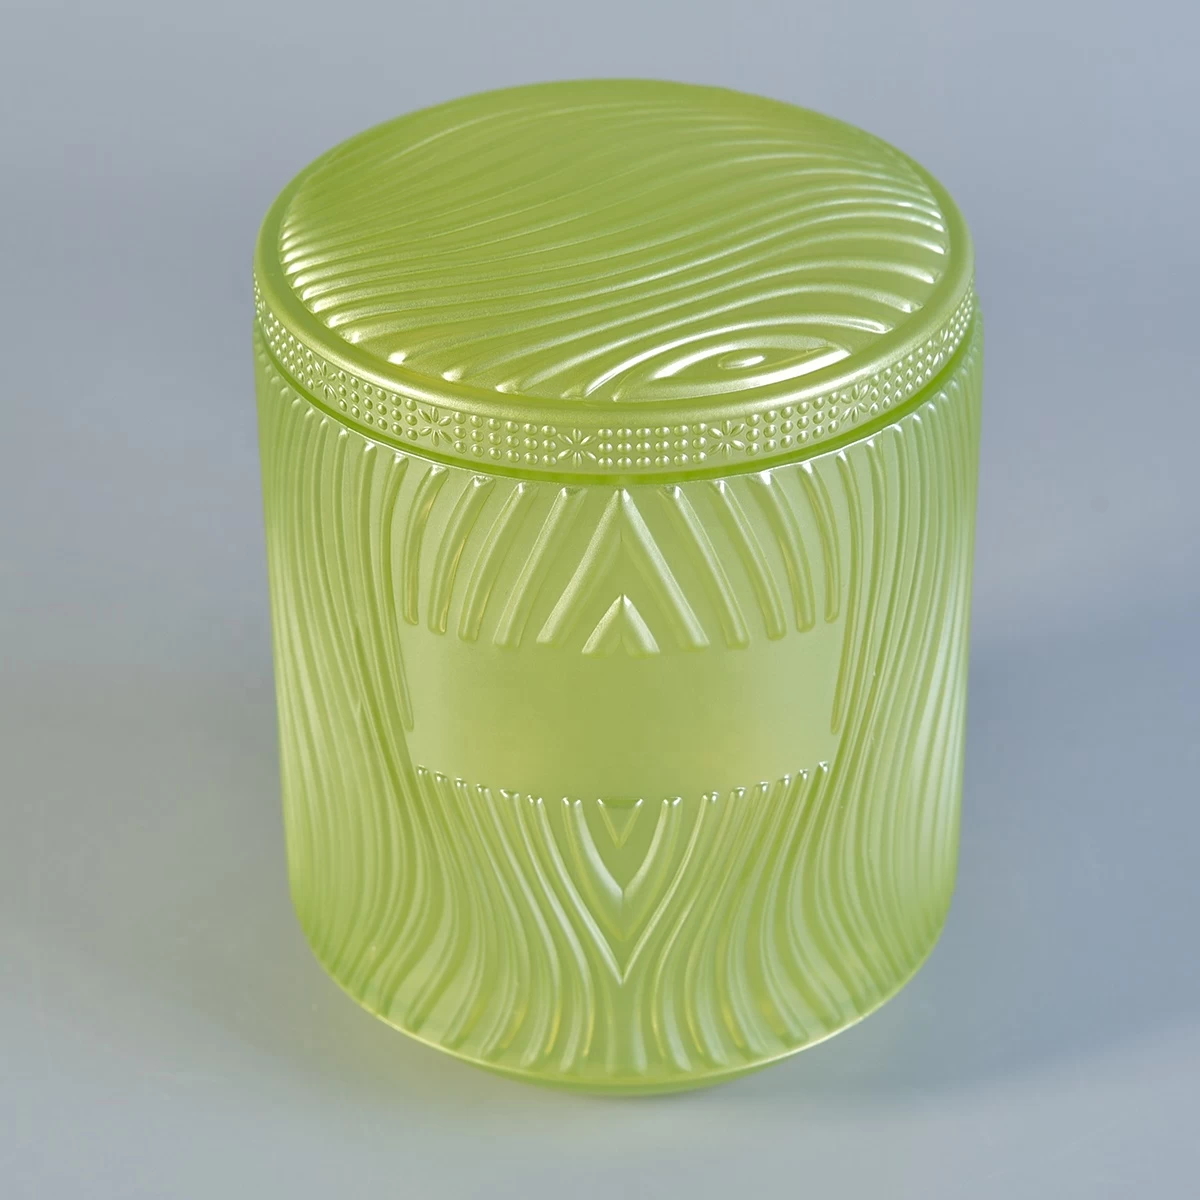 Sunny design Wholesales custom luxury glass candle holders with lid